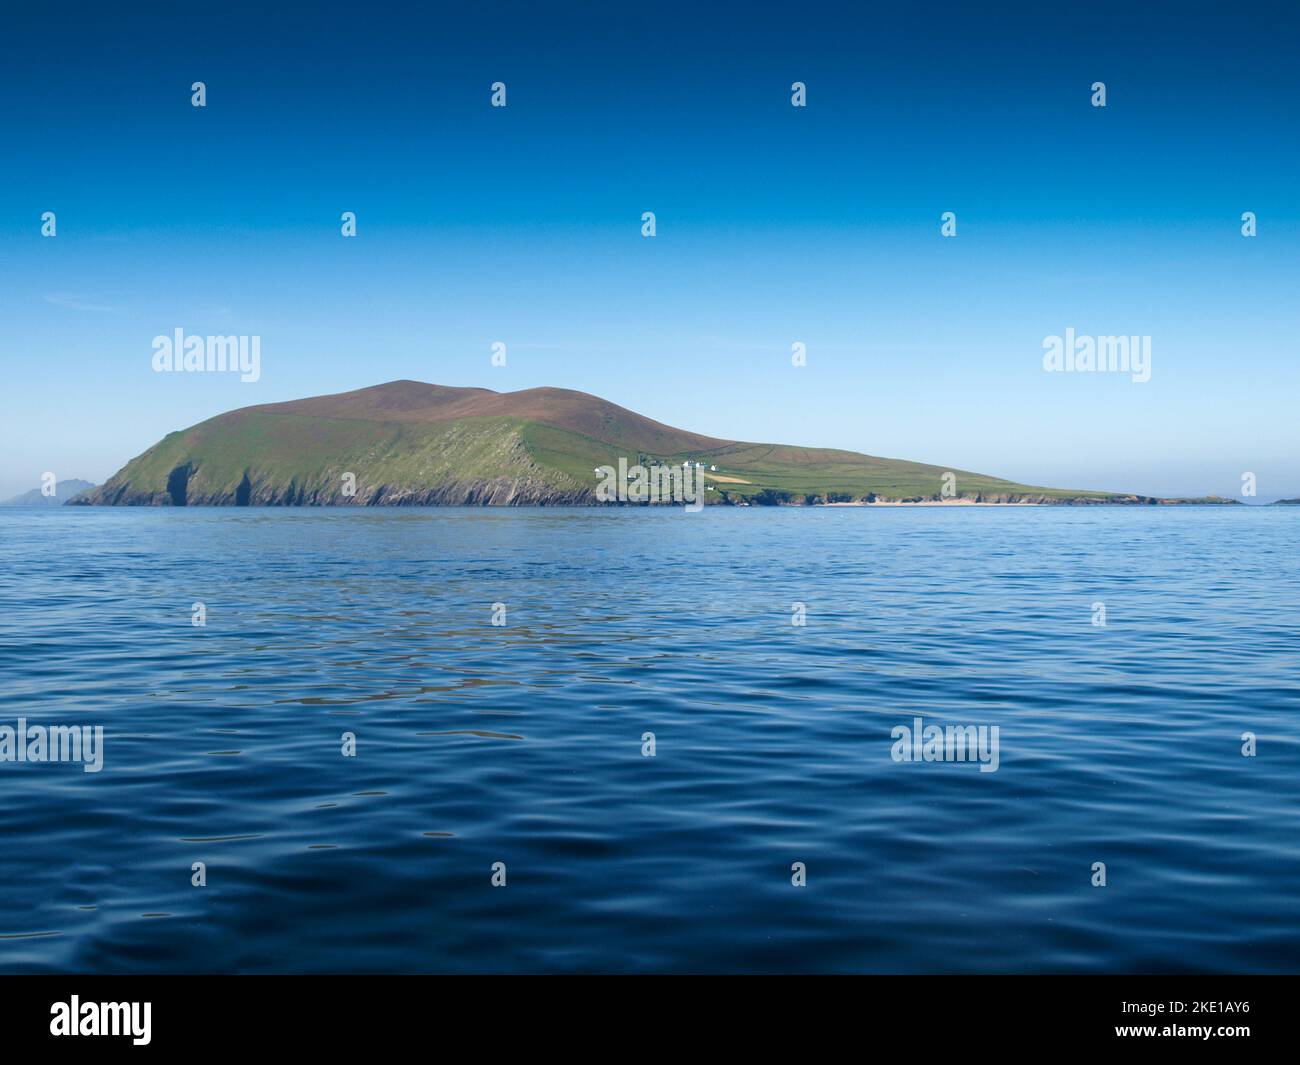 Blasket island, view from a fishing boat near the Slea Head on the Dingle Peninsula in Ireland with a clear deep blue sky Stock Photo